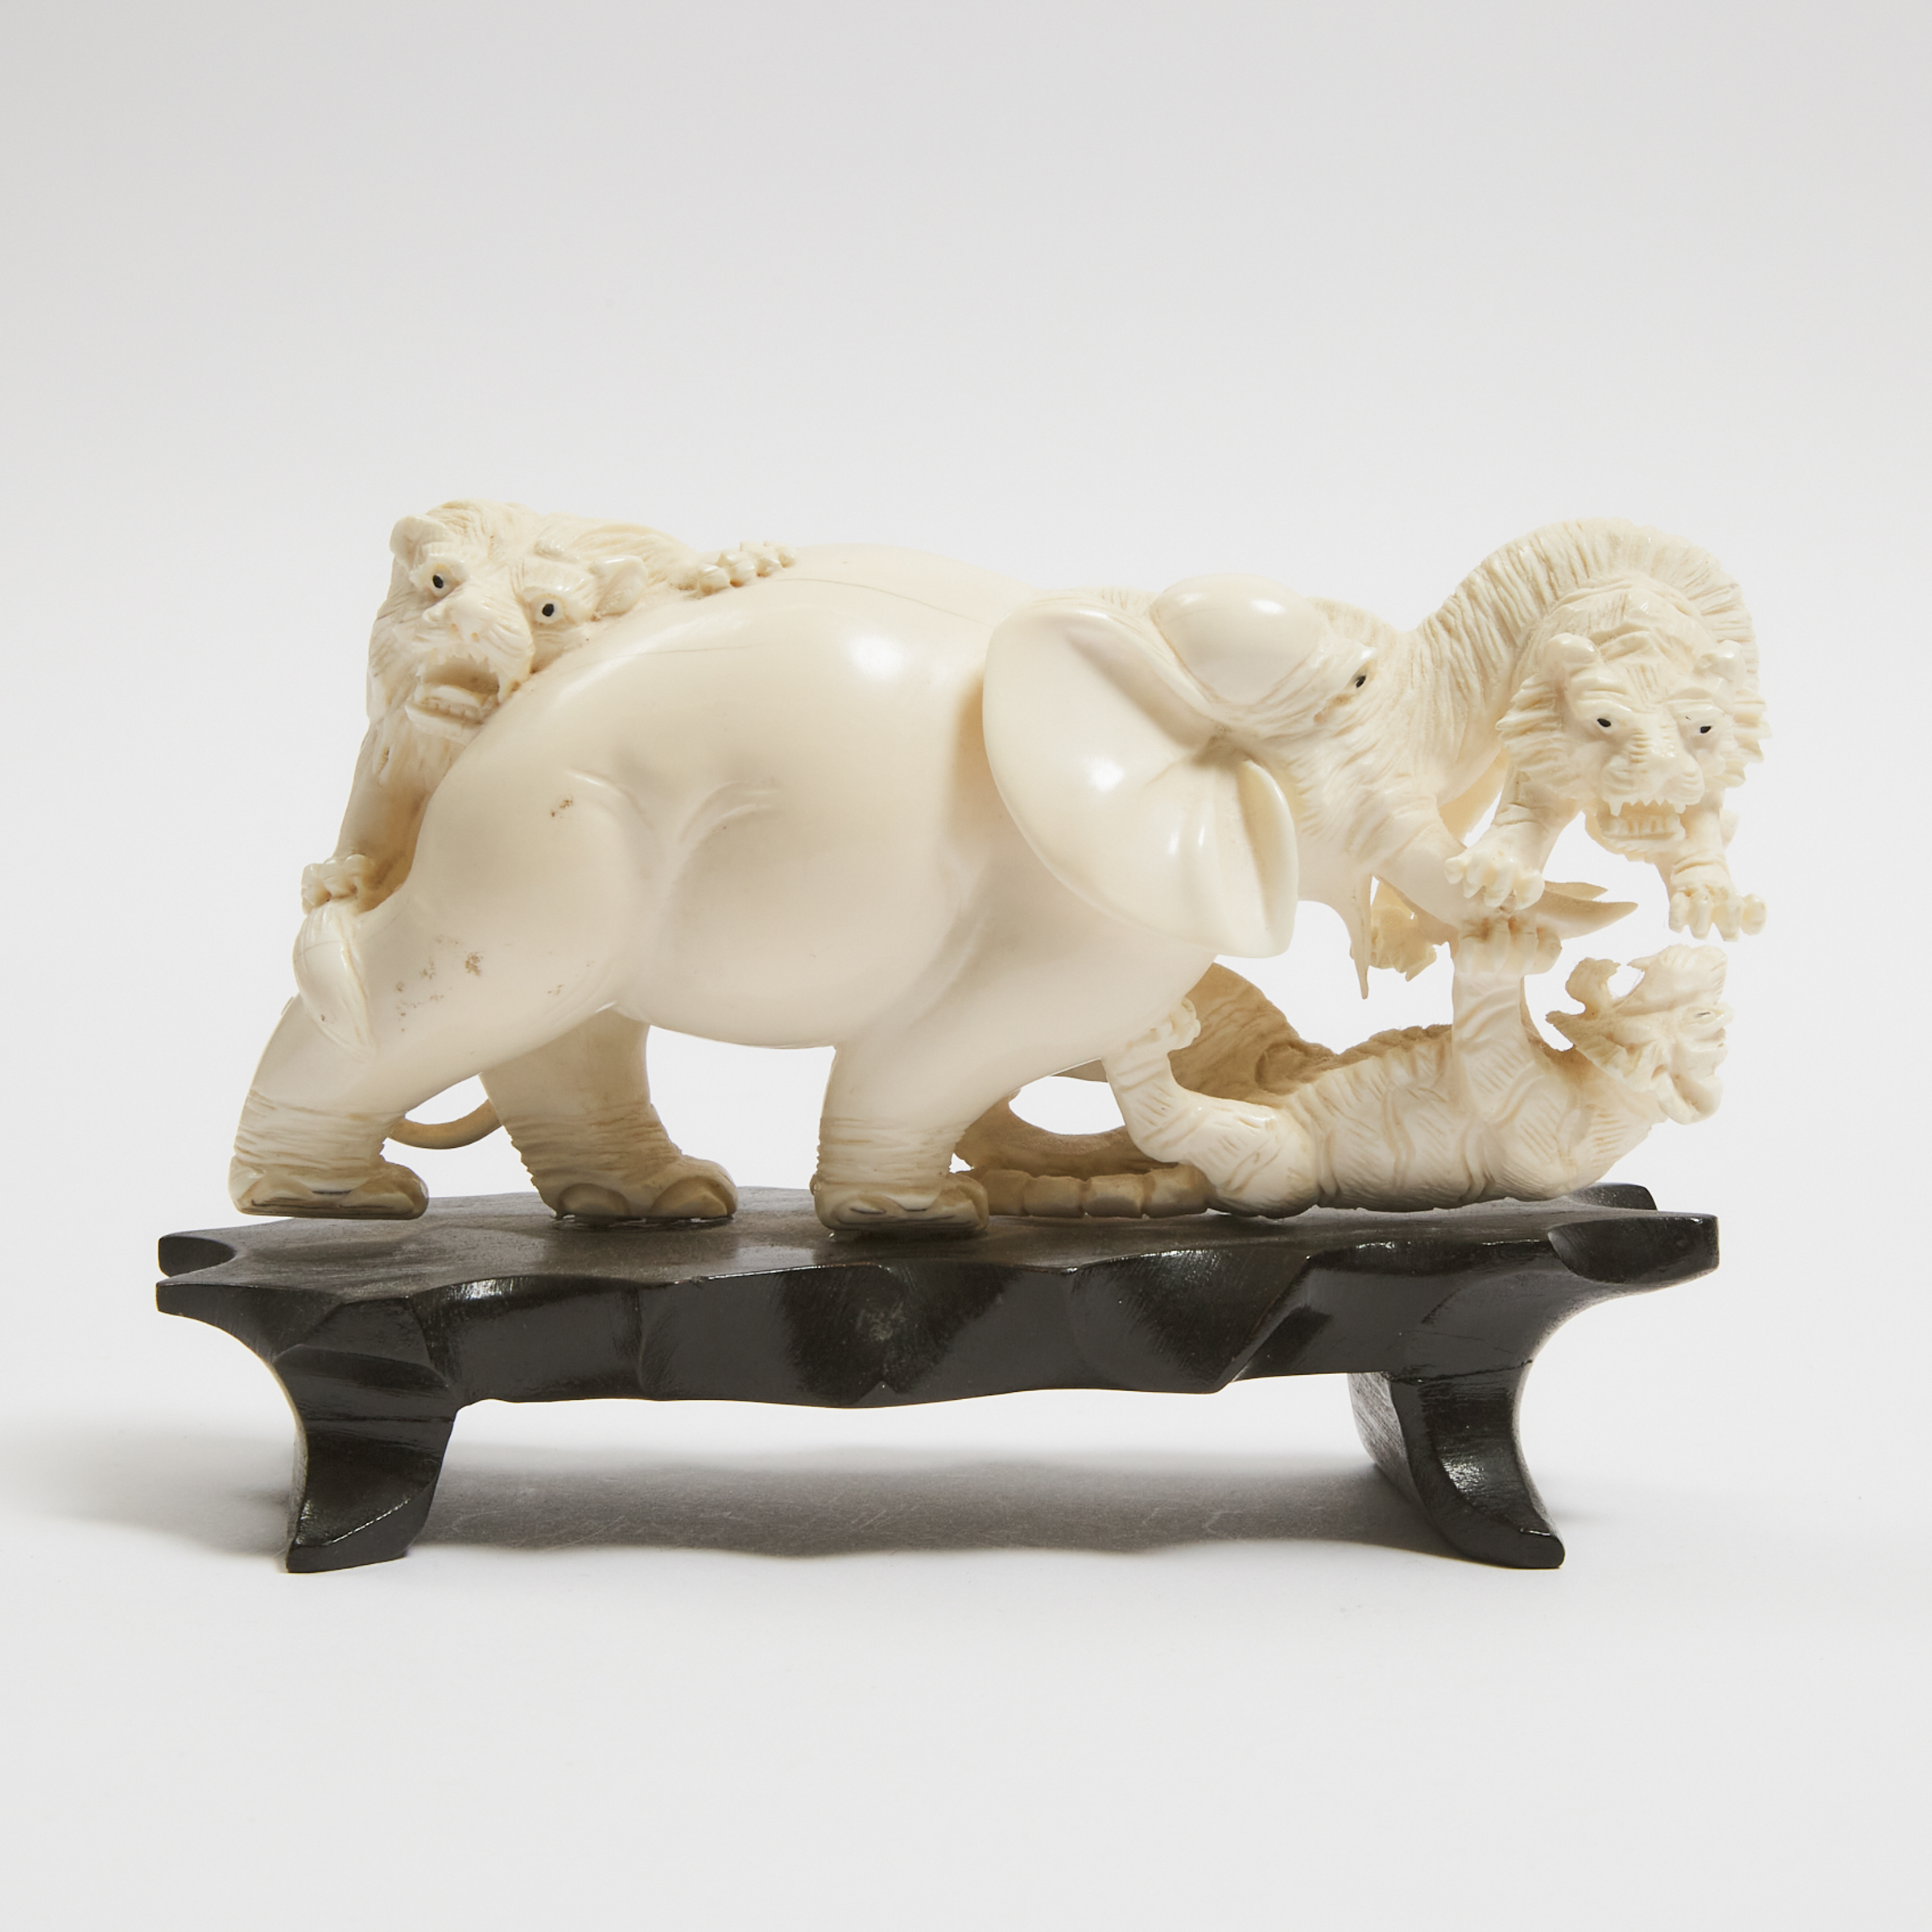 An Ivory 'Elephant and Tiger' Group, Mid 20th Century